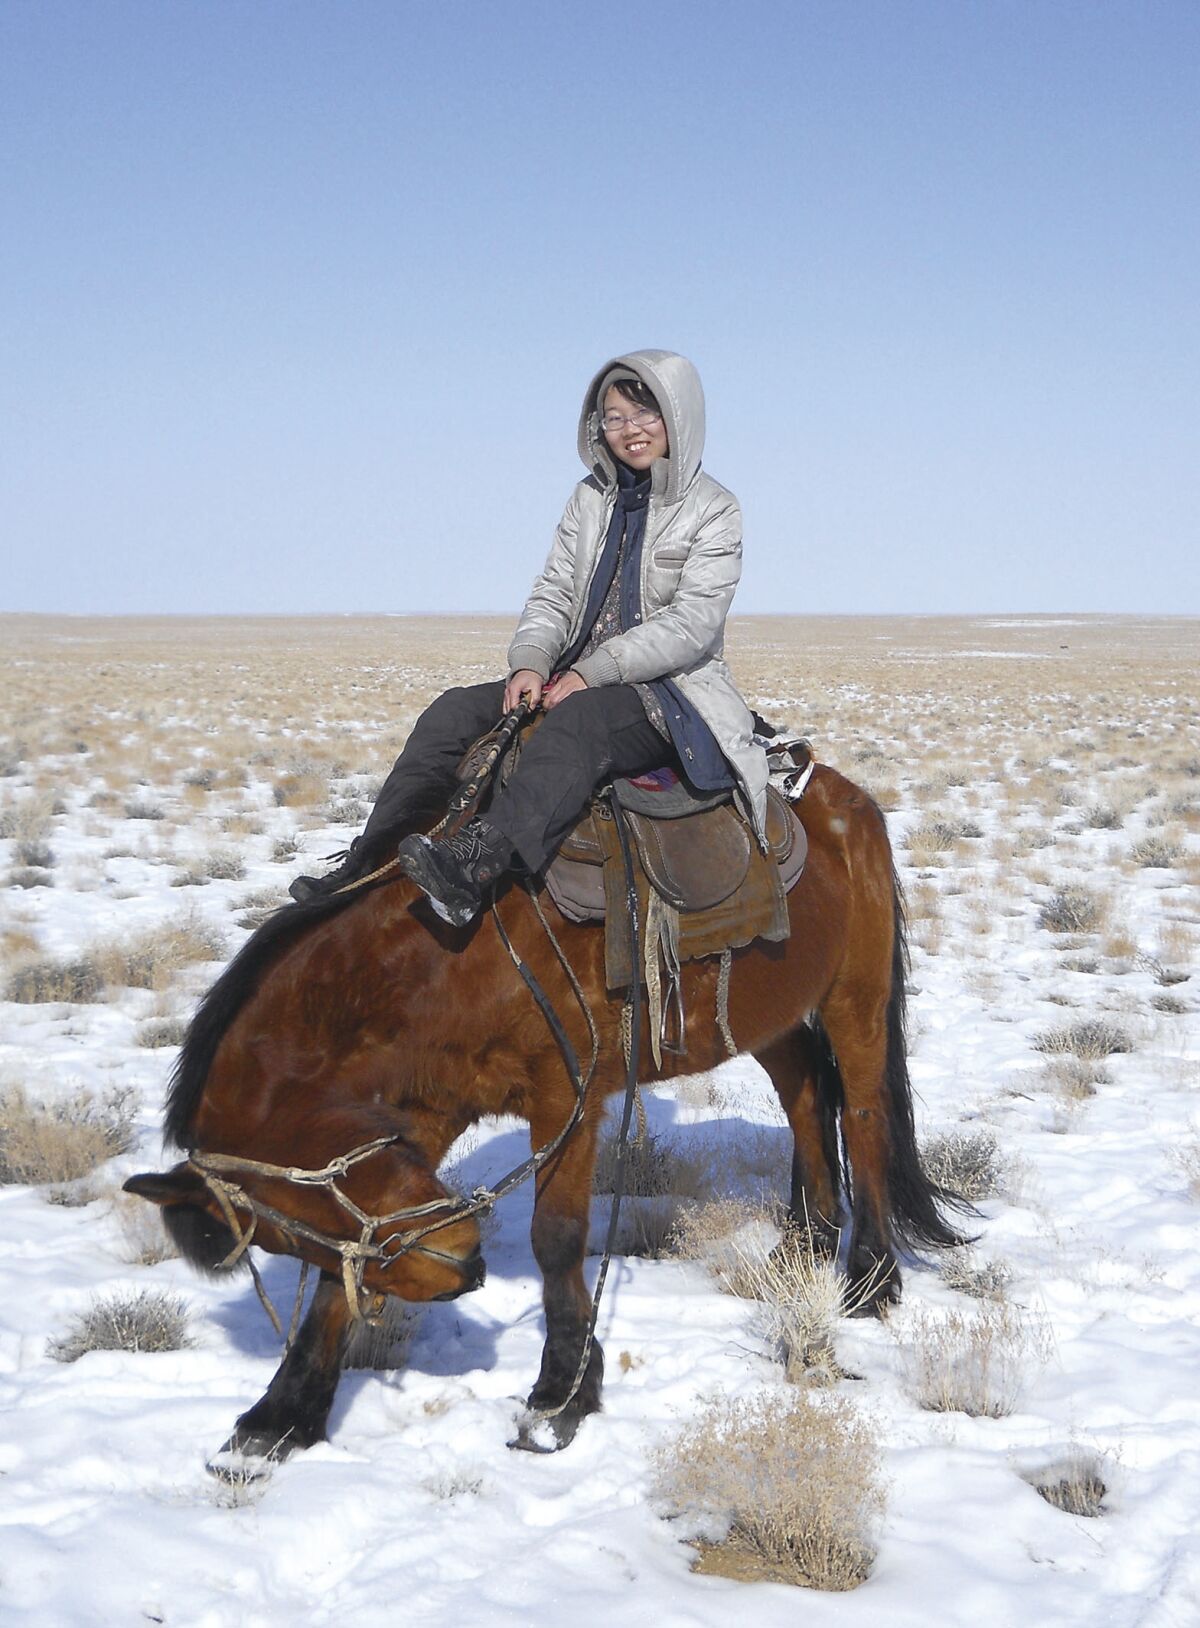 Astra’s first slate, expected to appear next year, includes a memoir from Li Juan, “Winter Pasture,” about traveling into northwest China with nomadic Kazakh herders.